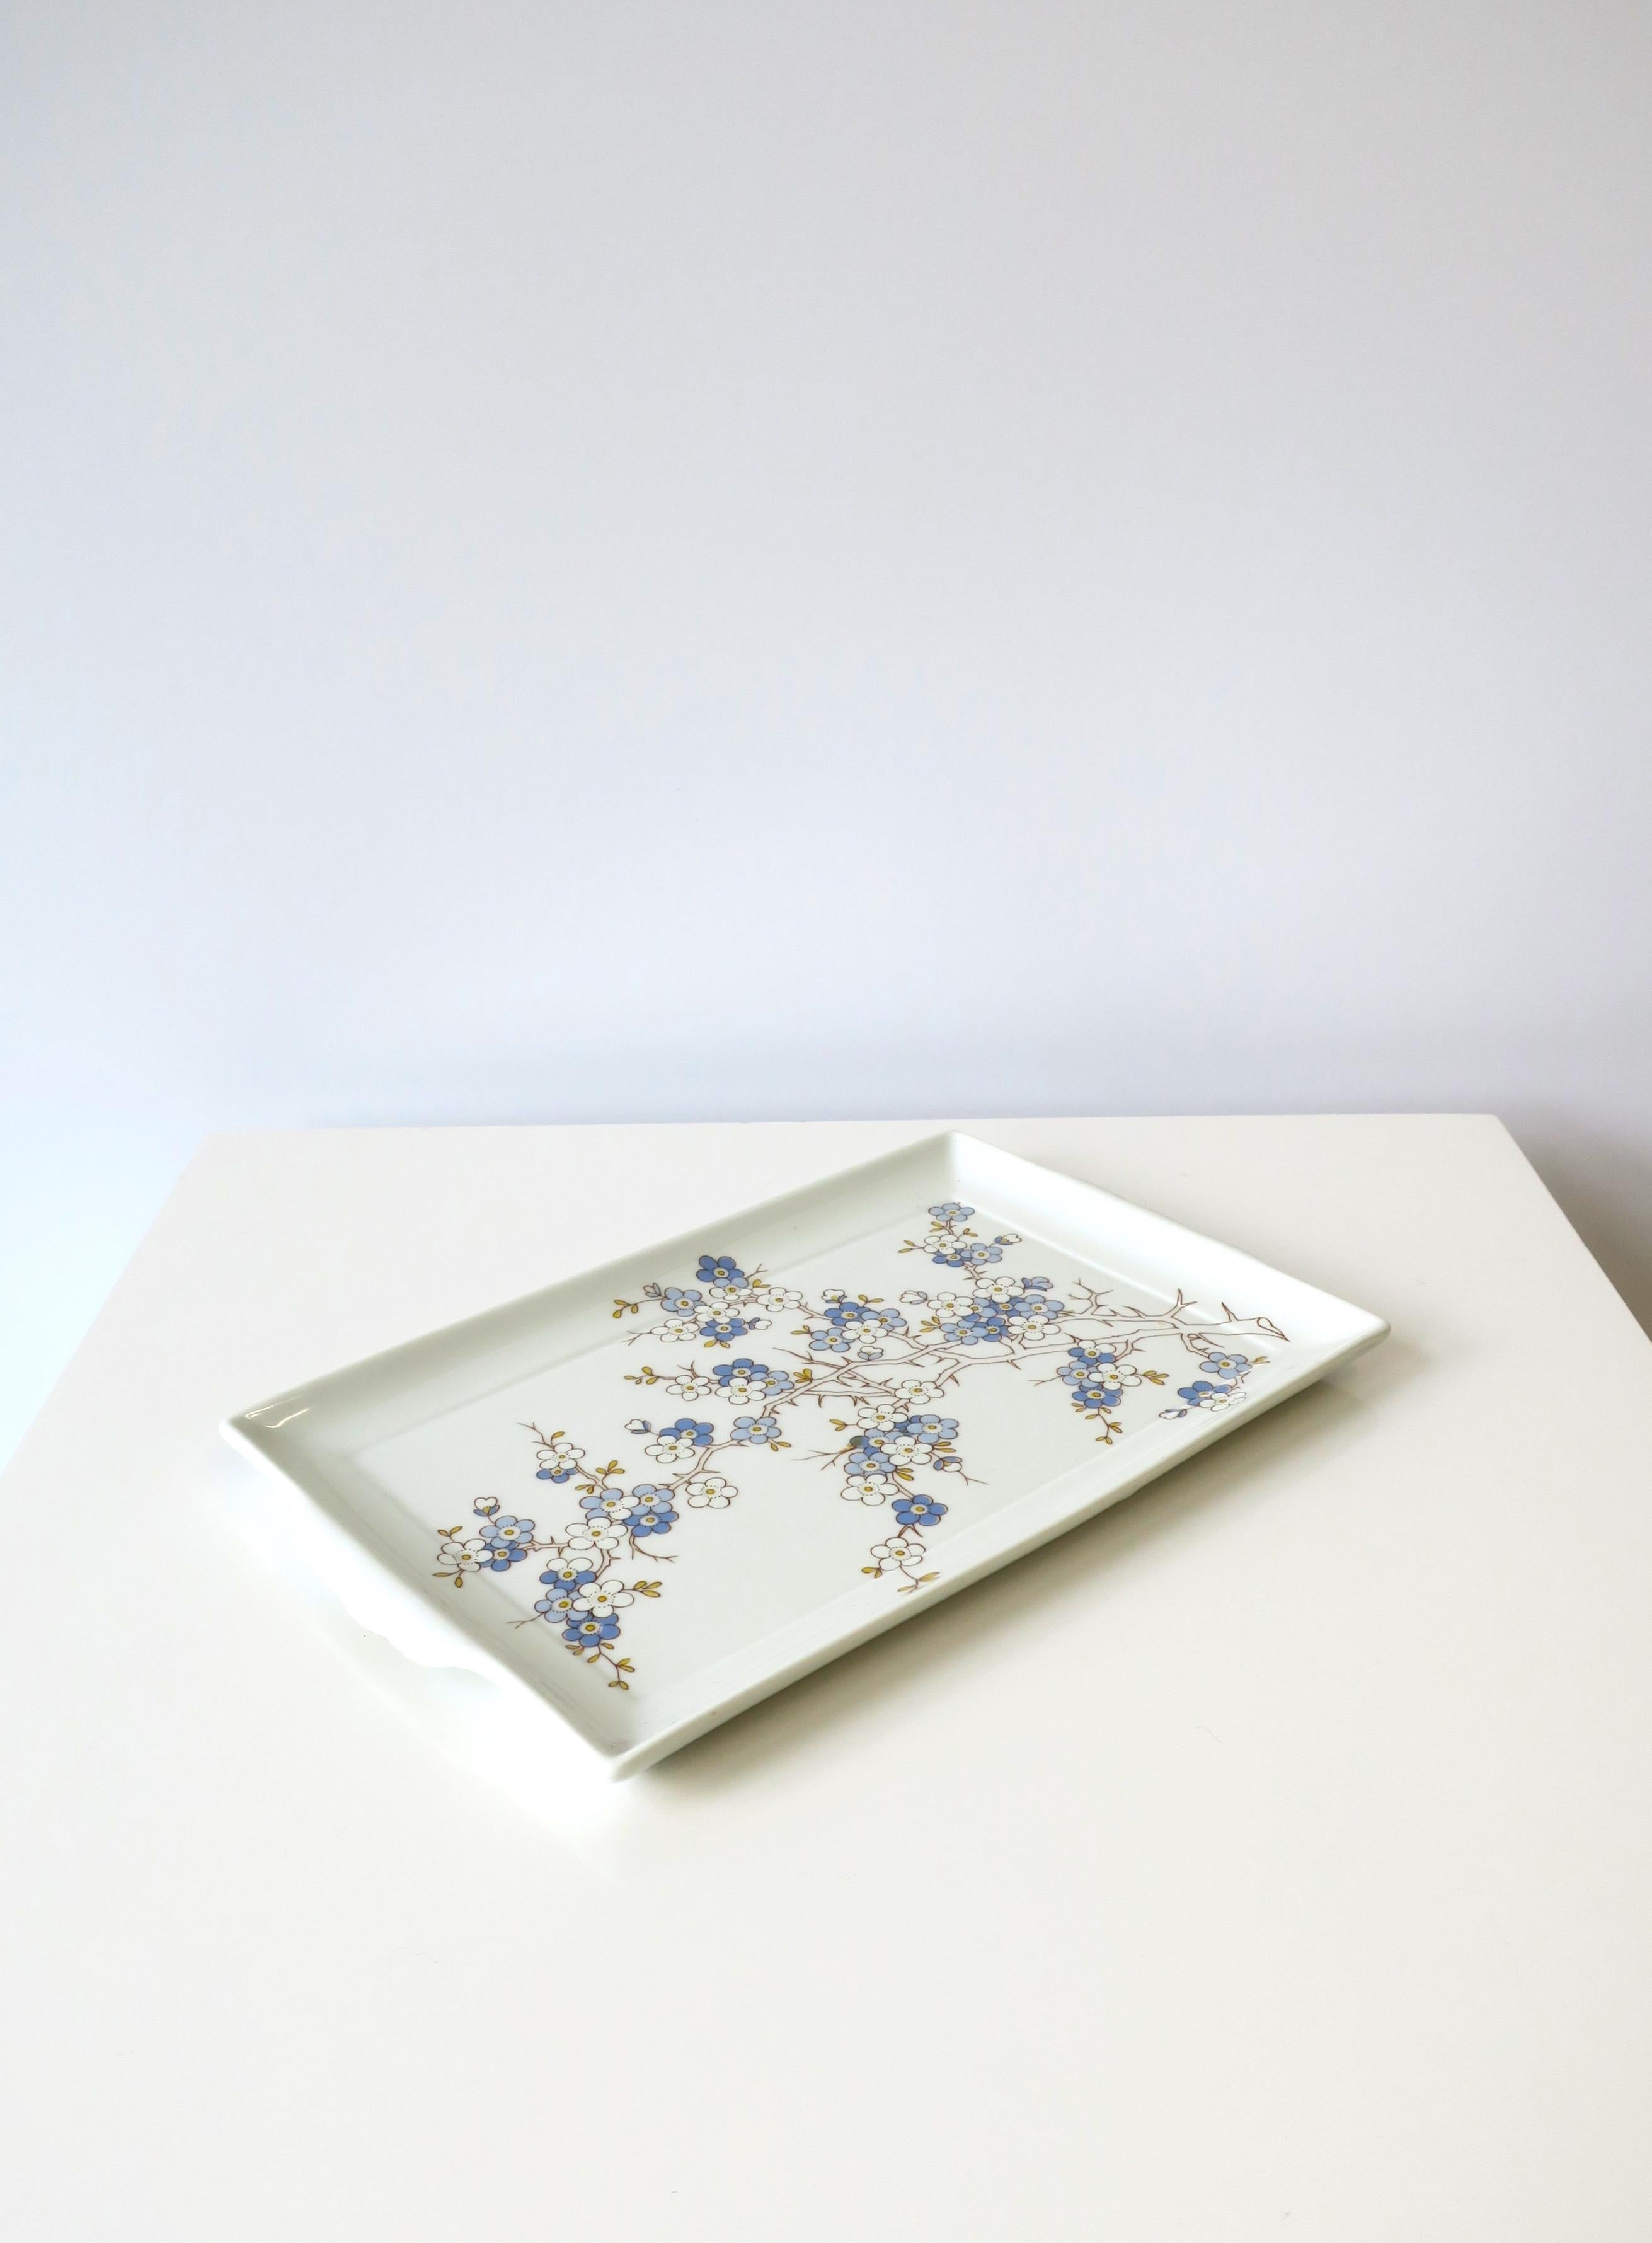 20th Century Richard Ginori Italian Porcelain Blue and White Vanity or Serving Tray For Sale